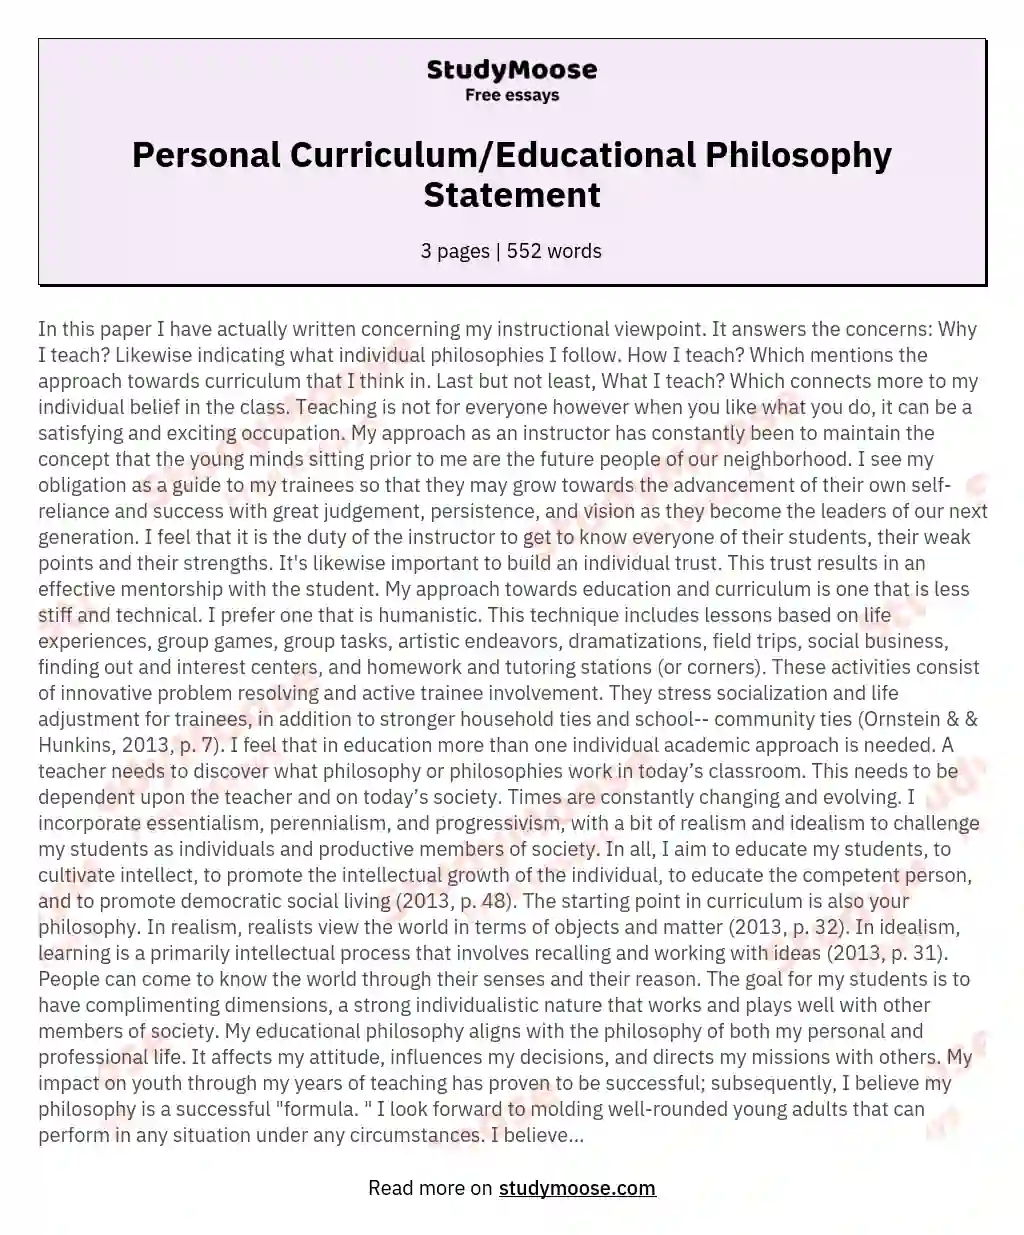 Personal Curriculum/Educational Philosophy Statement